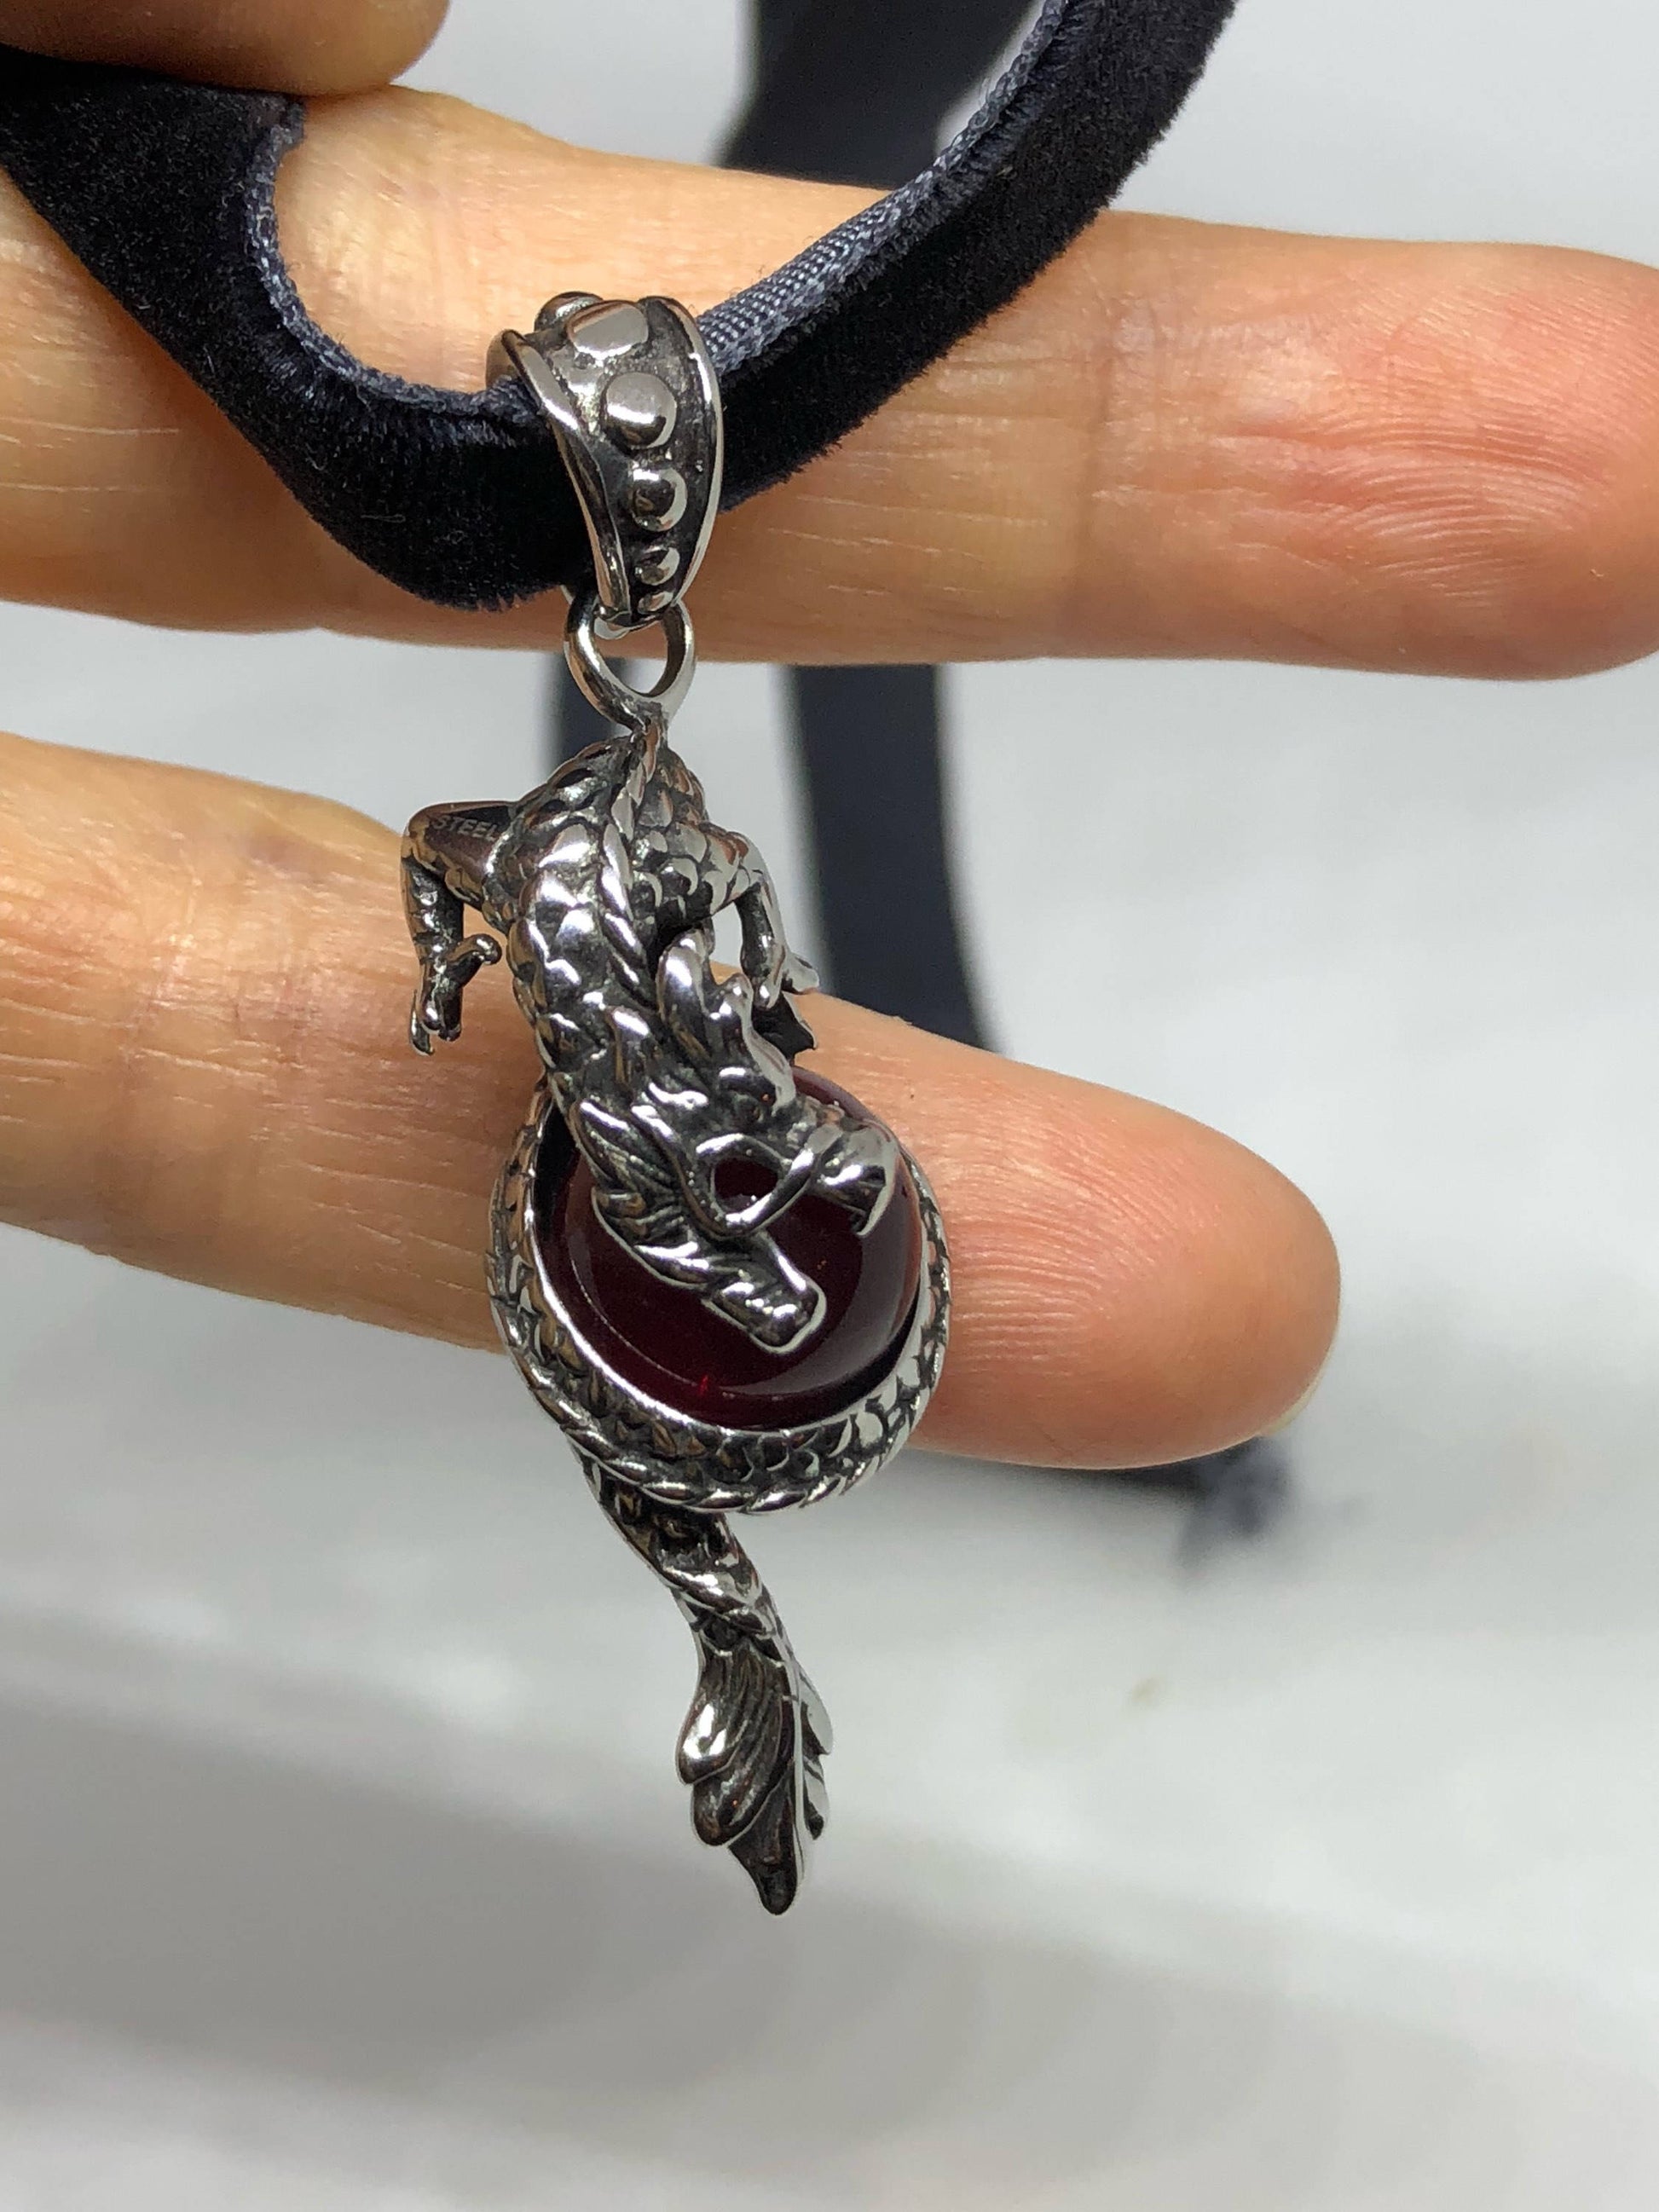 Vintage Handmade Silver Stainless Steel Gothic Dragon Pendant Necklace